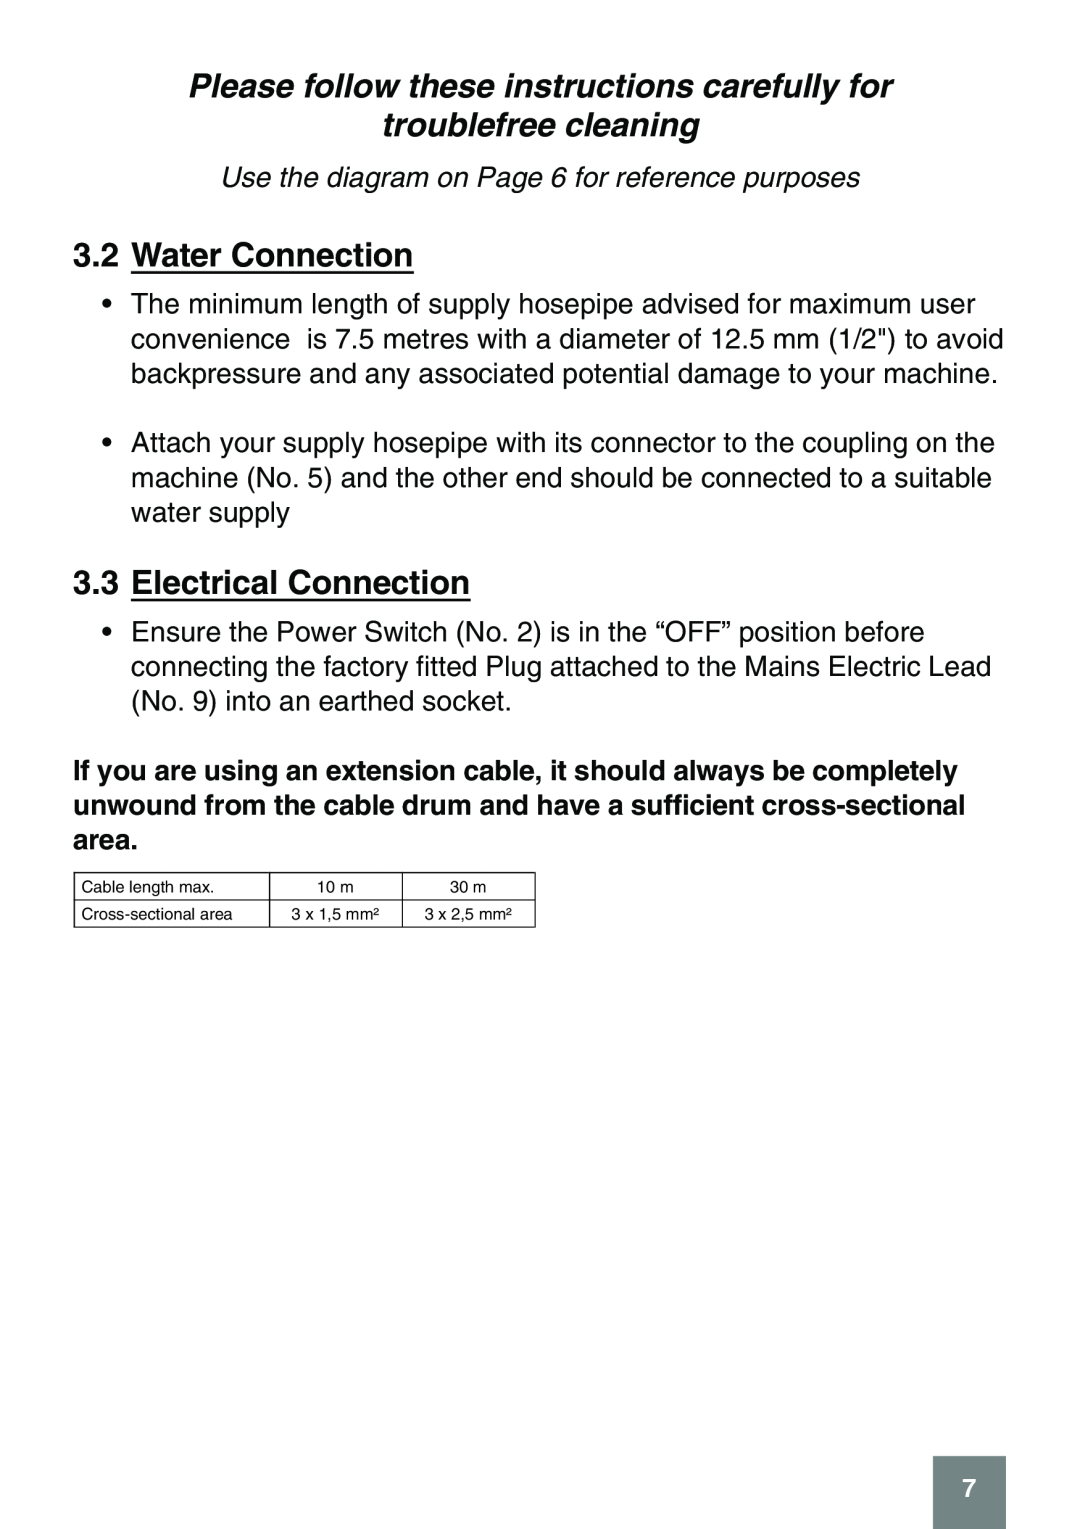 Karcher 397 m plus, darcher manual Water Connection, Electrical Connection, Use the diagram on Page 6 for reference purposes 